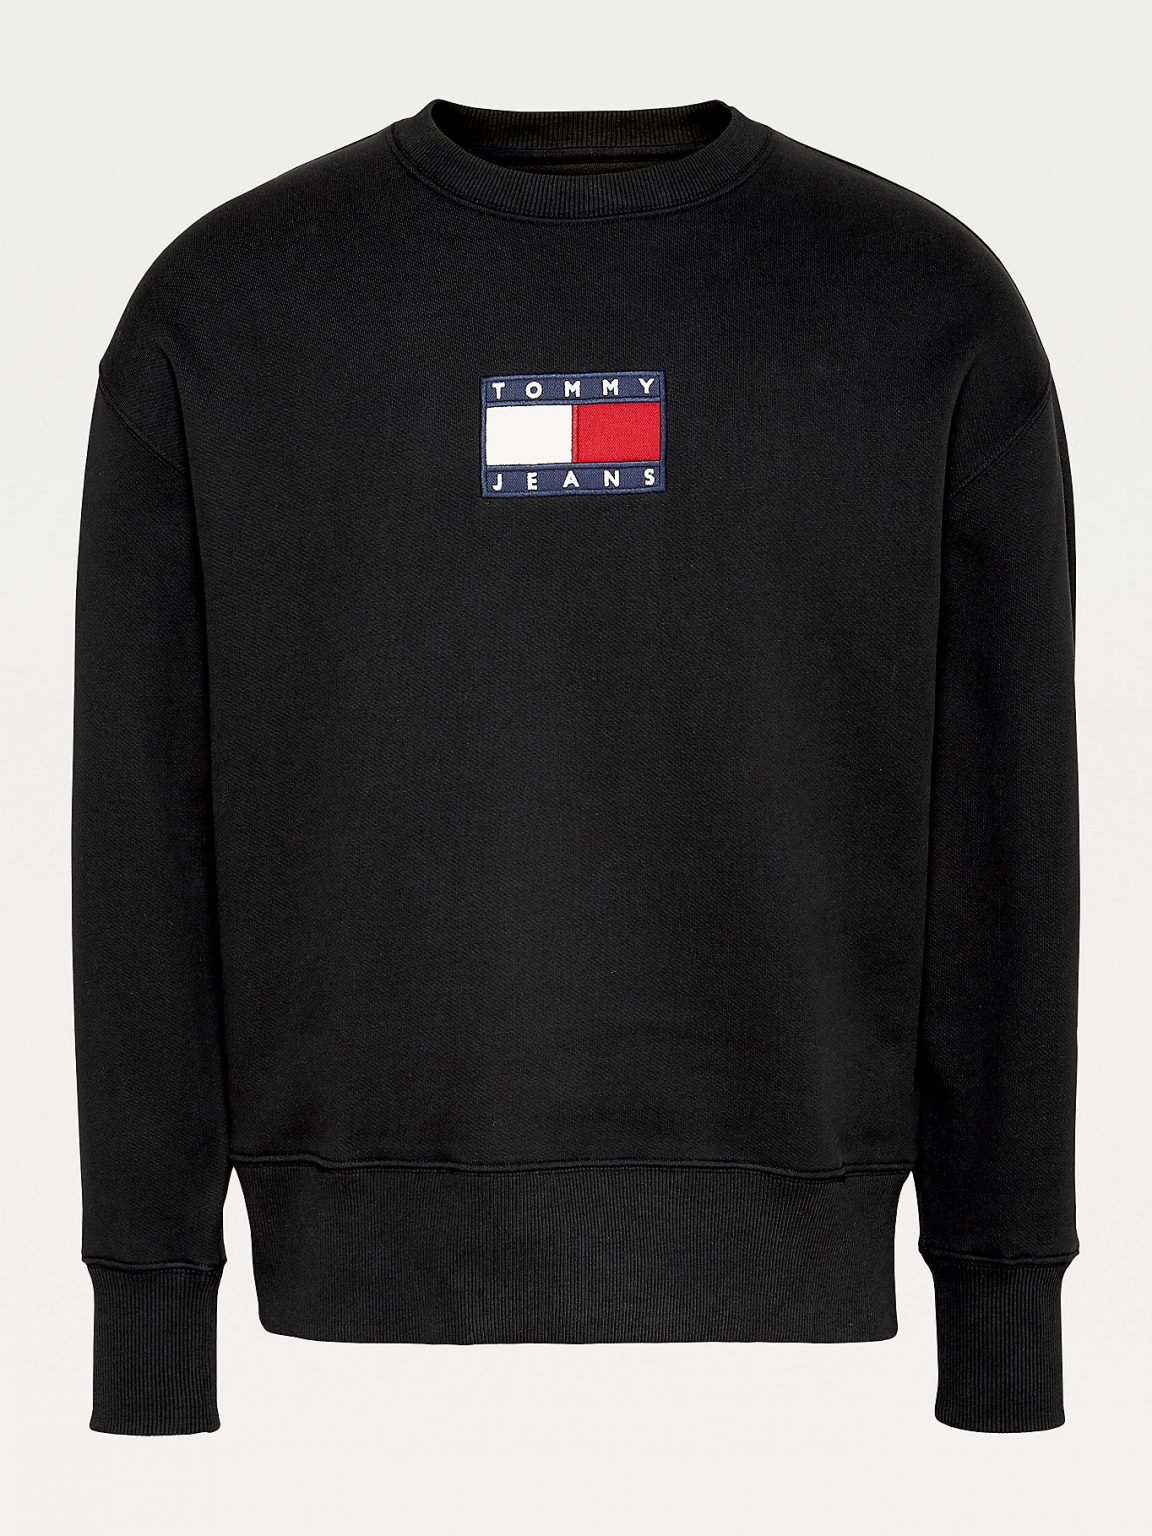 Buy Tommy Jeans Small Flag Crew Neck Black - Scandinavian Fashion Store